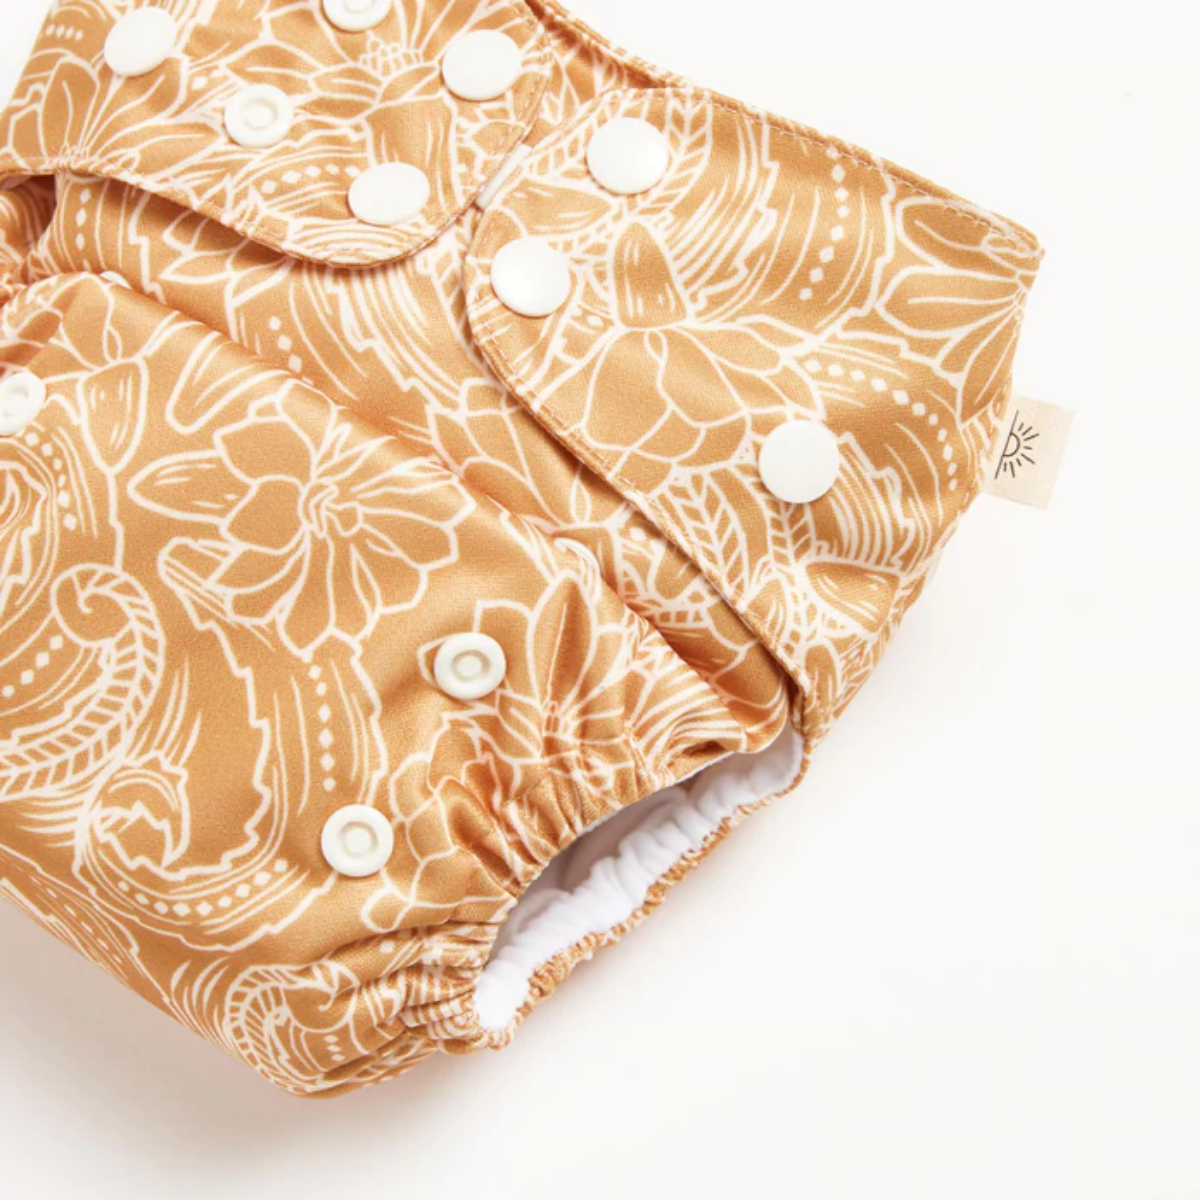 A close up of modern cloth diaper with a native print from EcoNaps in the shade Desert Cactus.